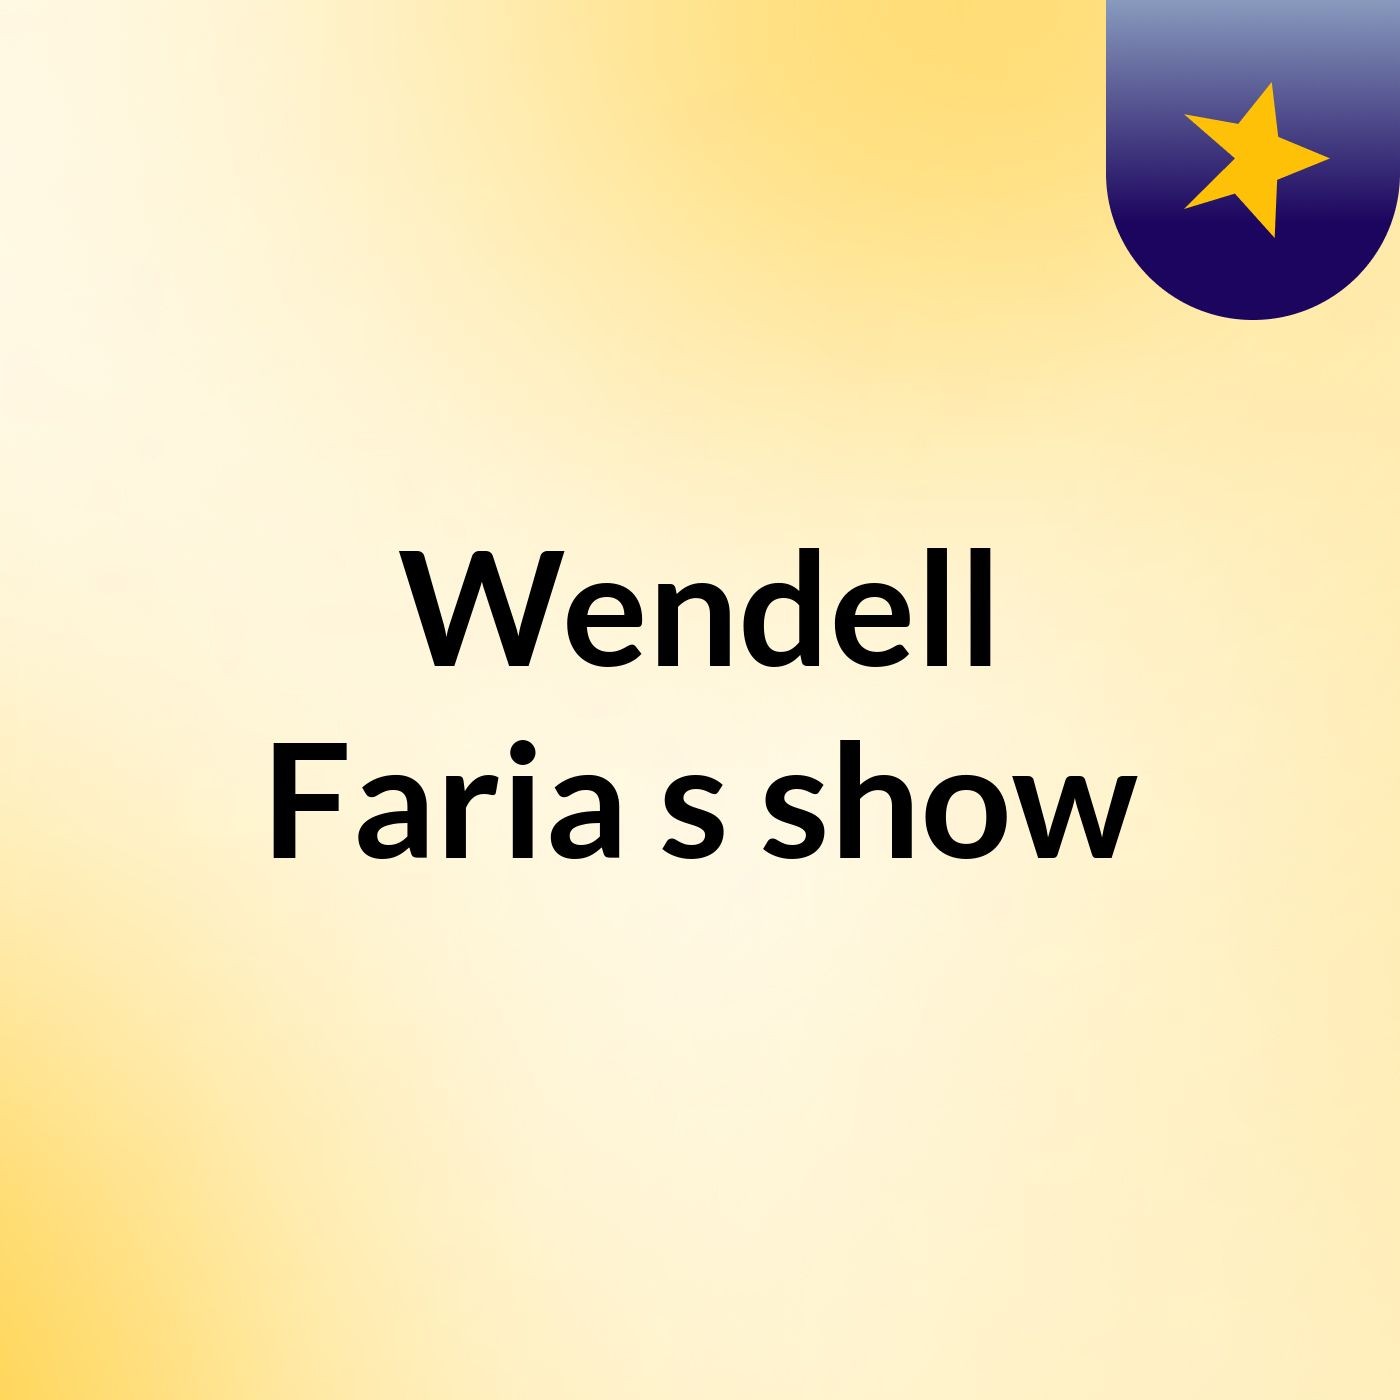 Wendell Faria's show